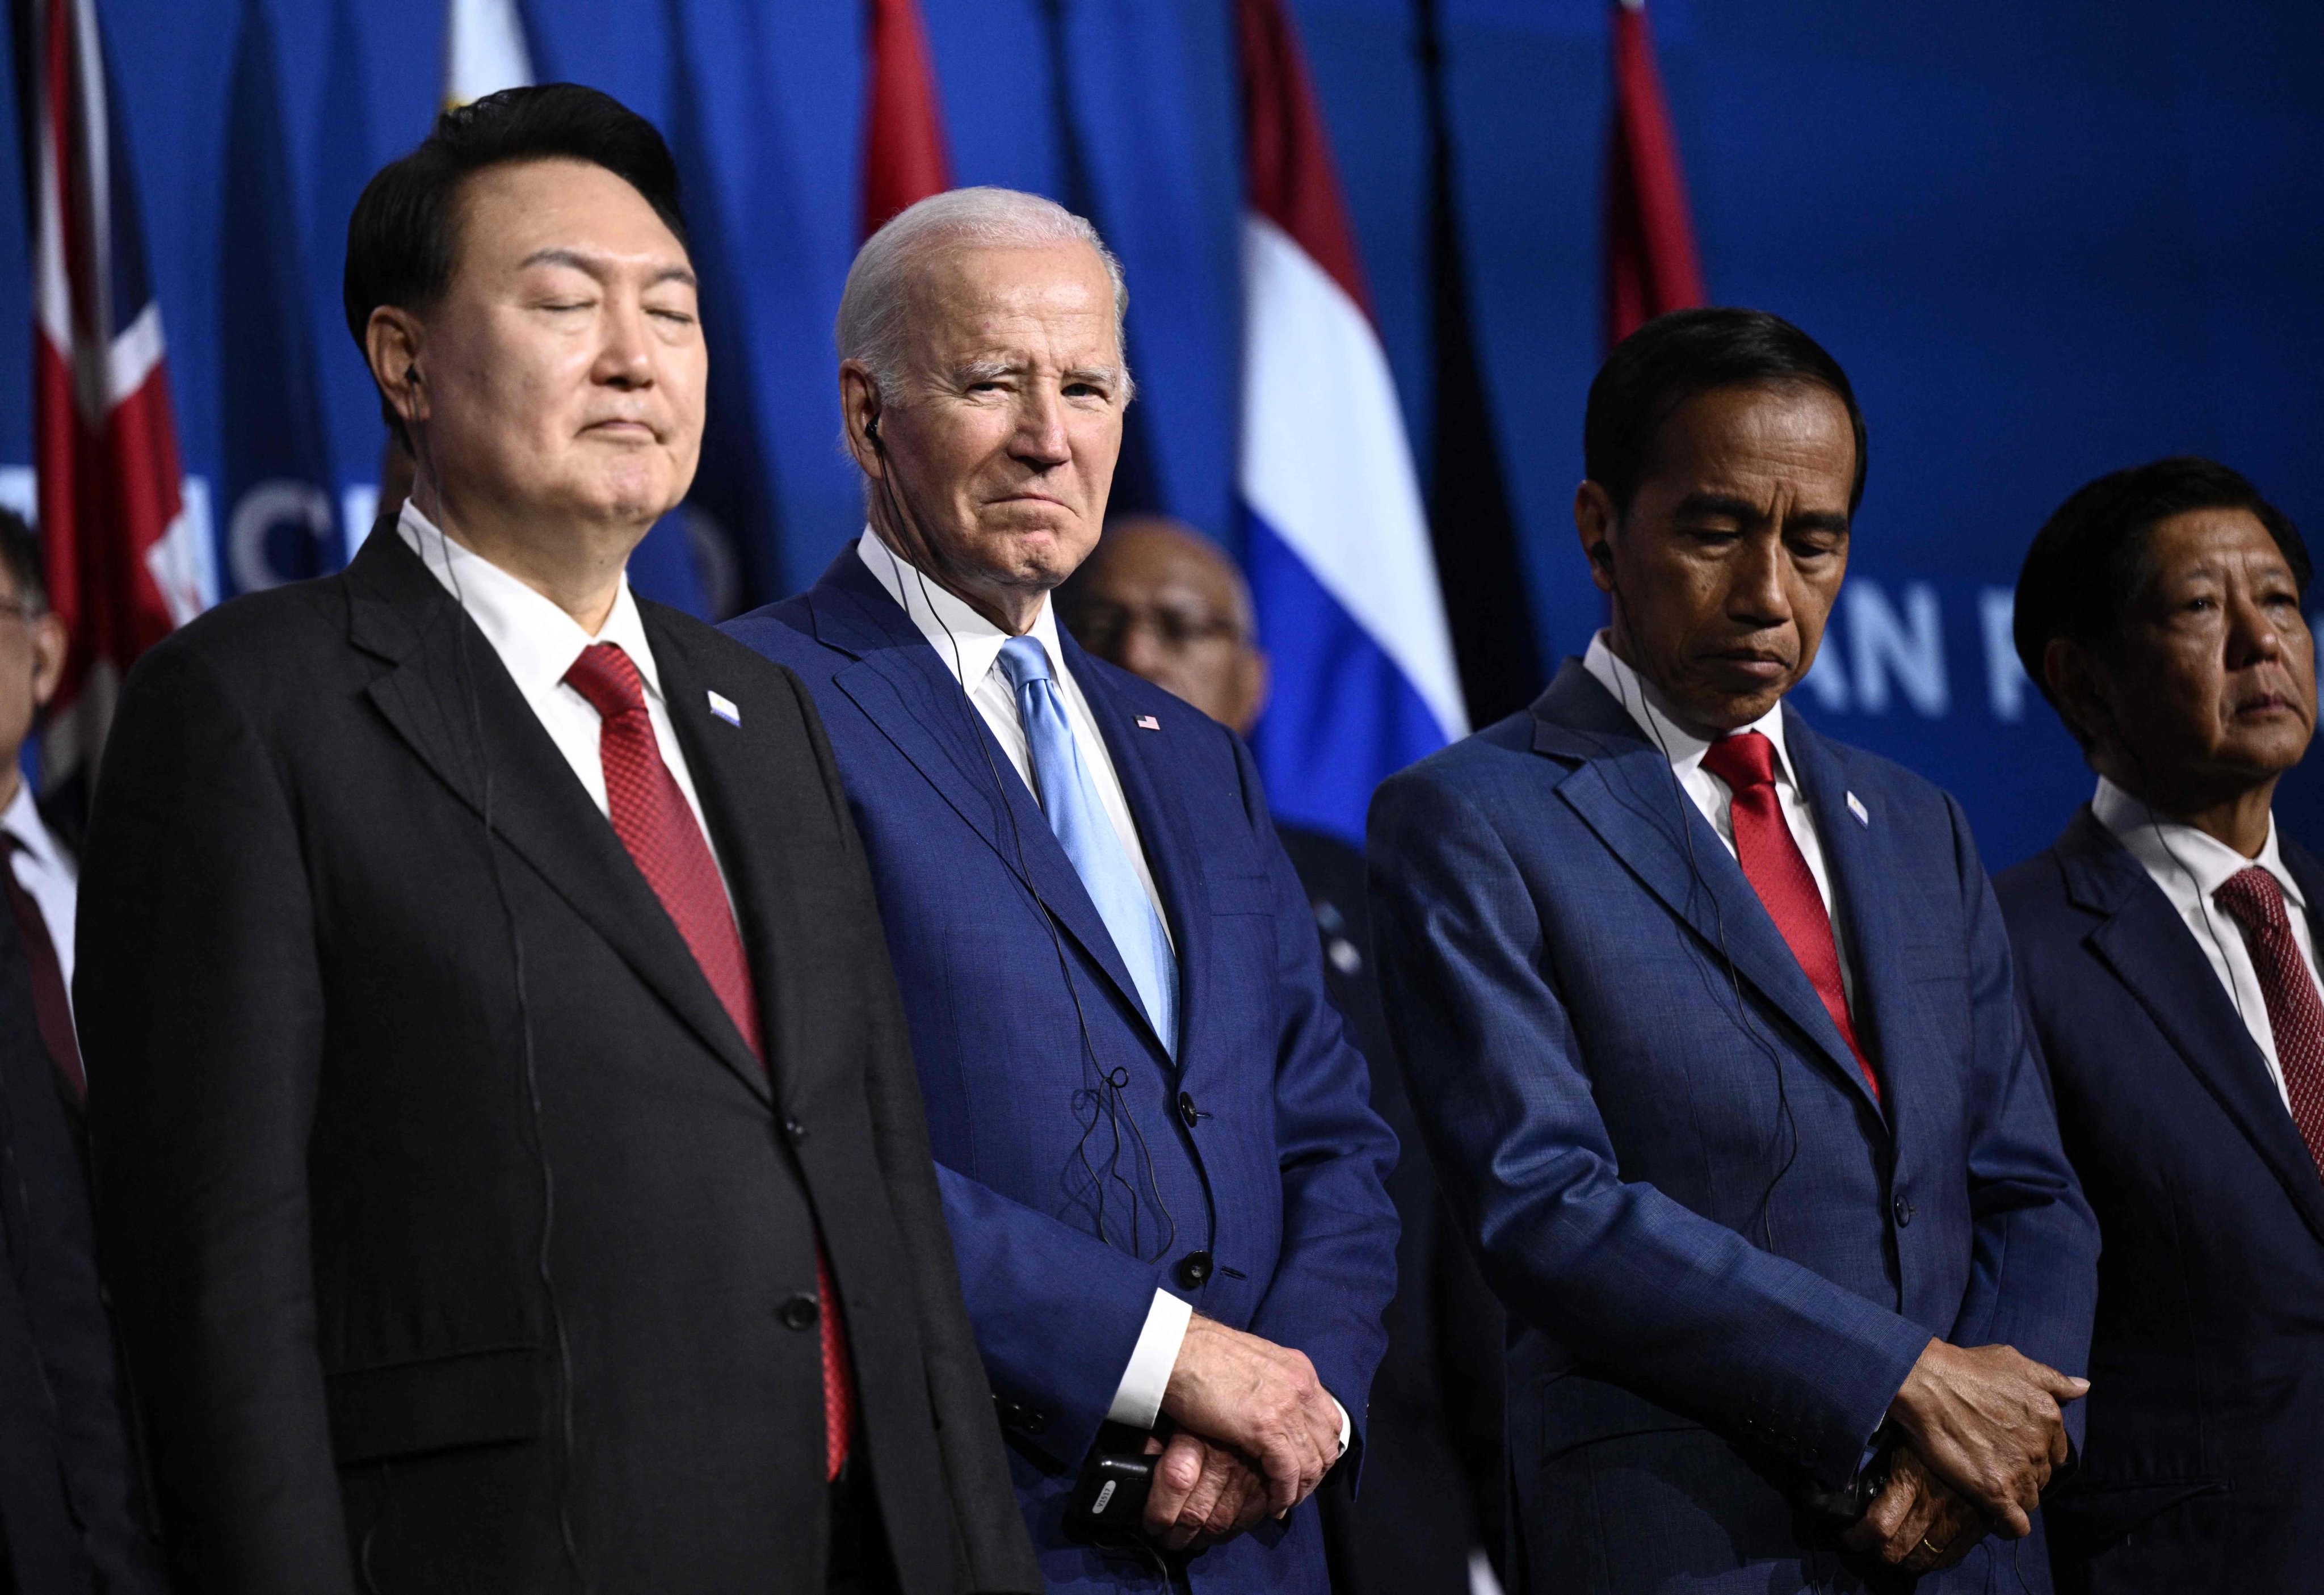 US President Joe Biden stands alongside South Korea’s Yoon Suk-yeol, Indonesia’s Joko Widodo and the Philippines’ Ferdinand Marcos Jnr during a meeting with members of the Indo-Pacific Economic Framework in San Francisco this month. Photo: AFP